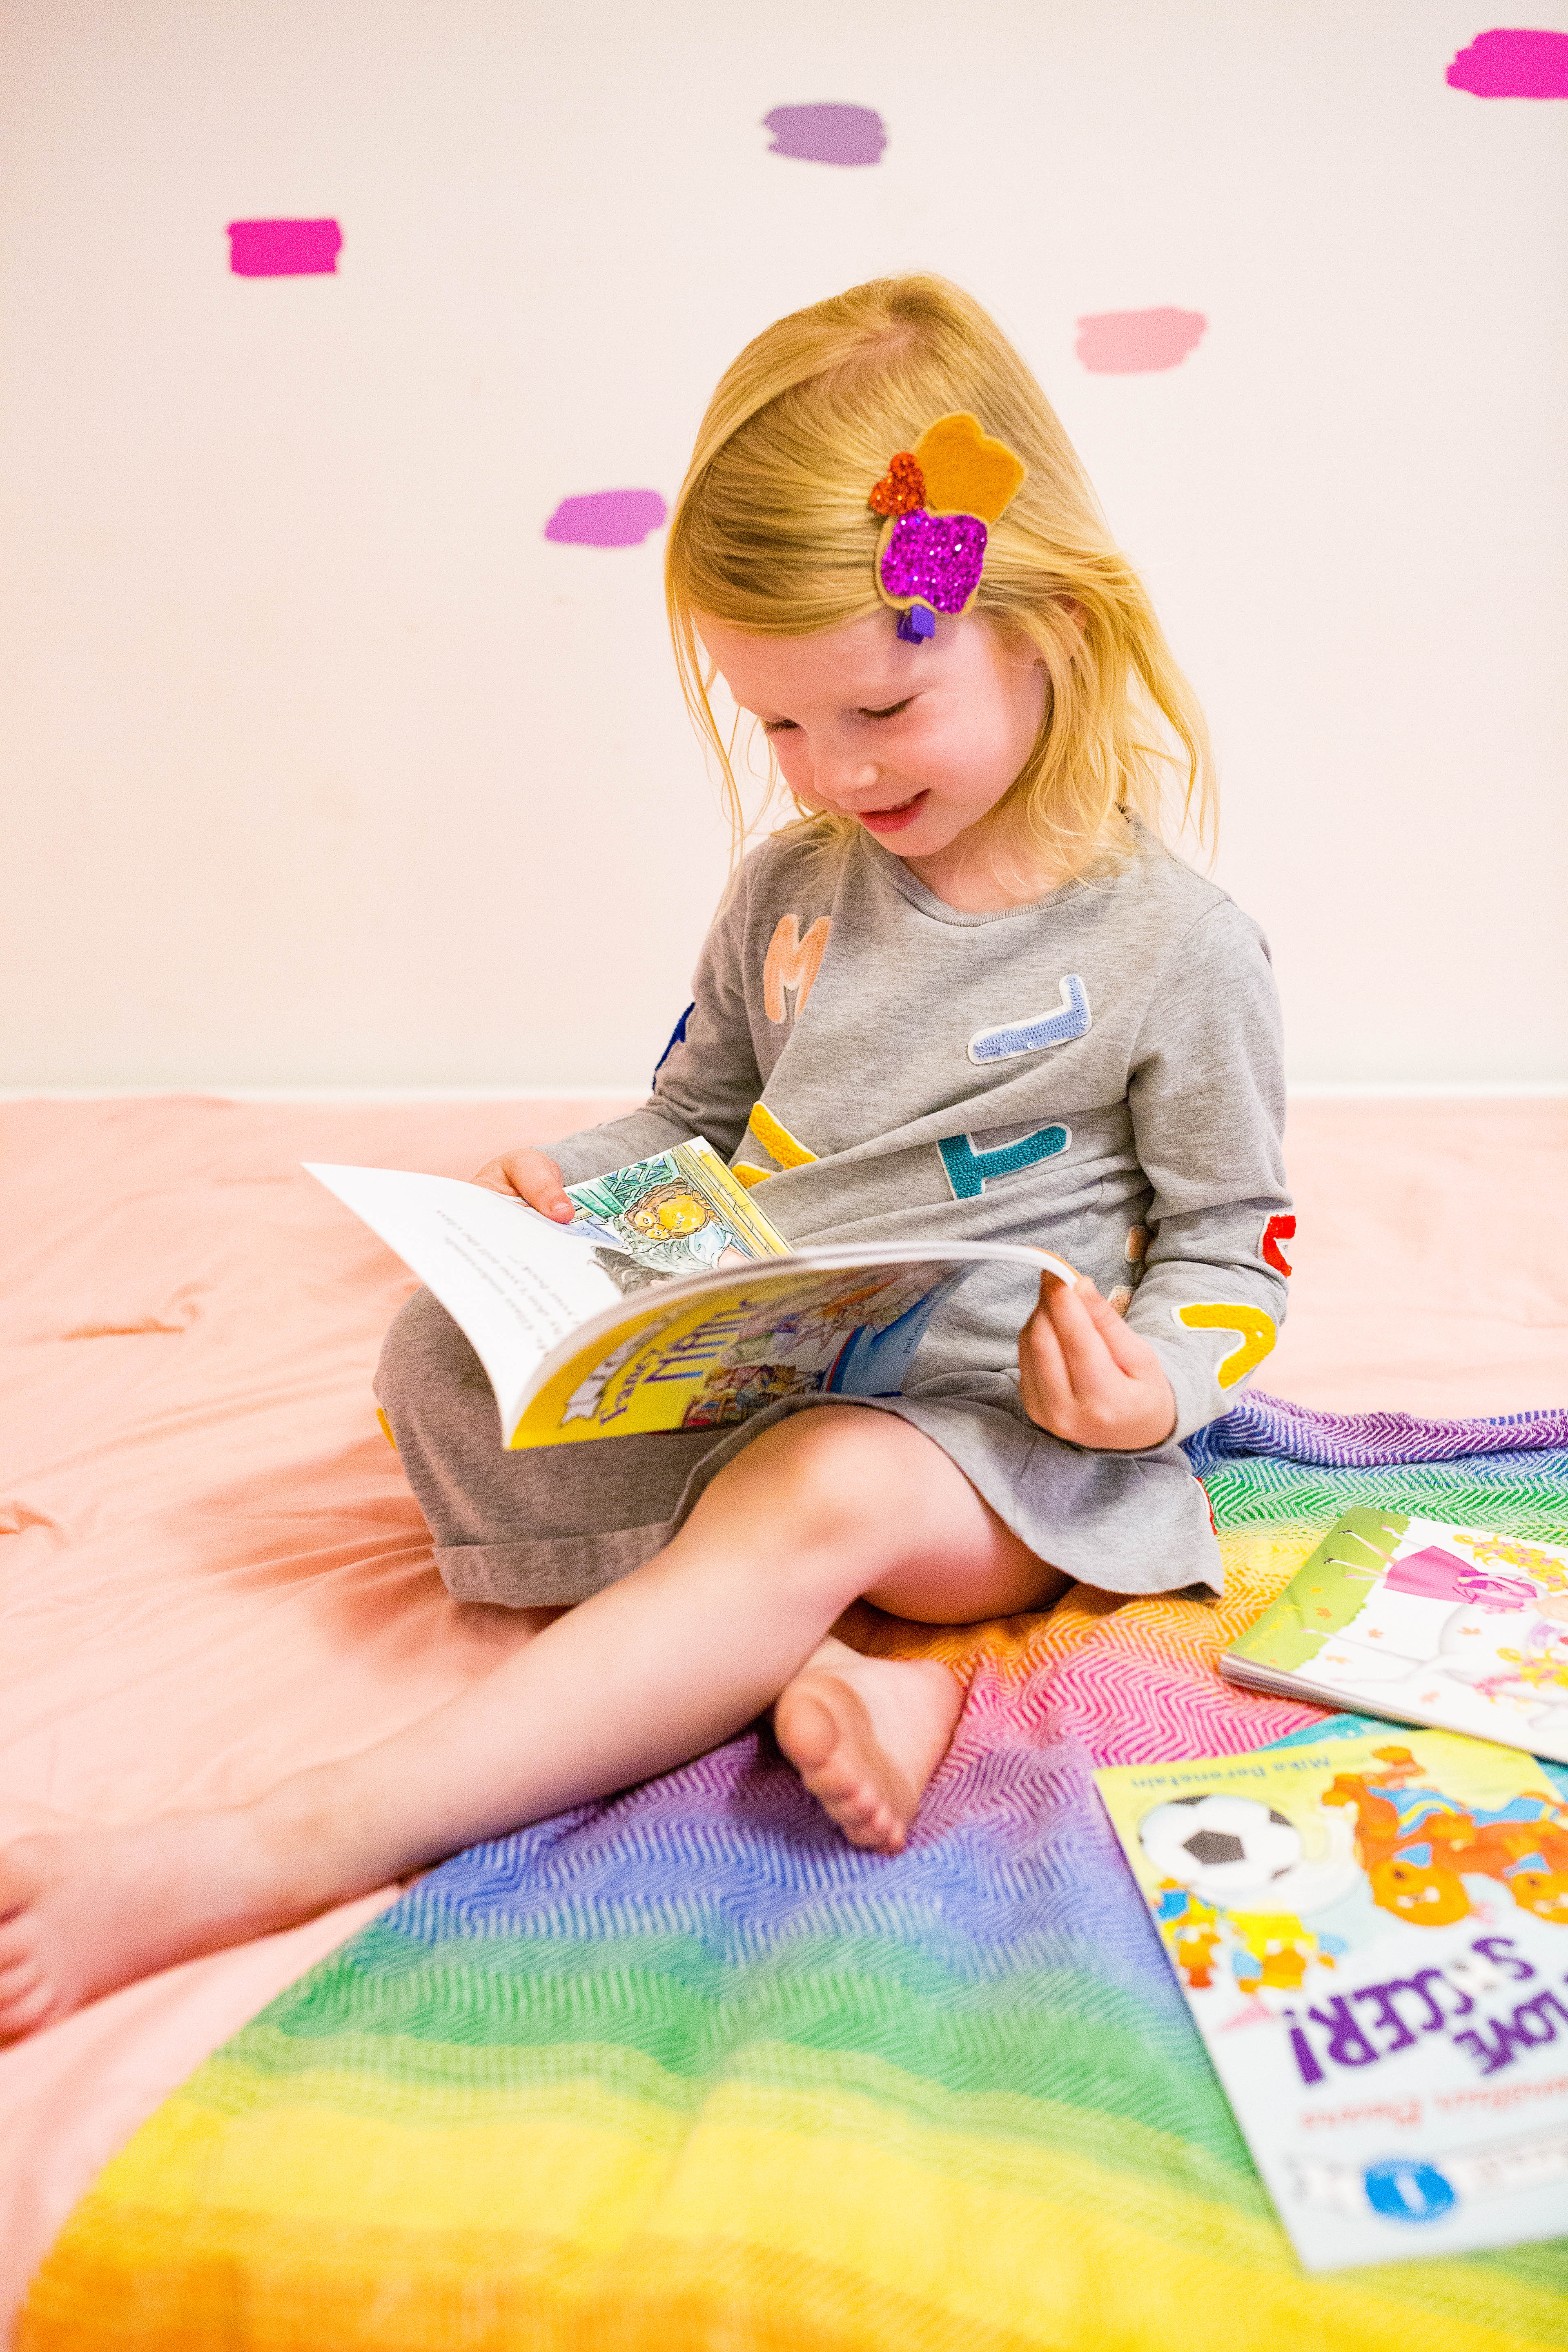 Looking for read aloud tips for busy parents? These 5 tips will help you fit read aloud sessions into your schedule with ease!